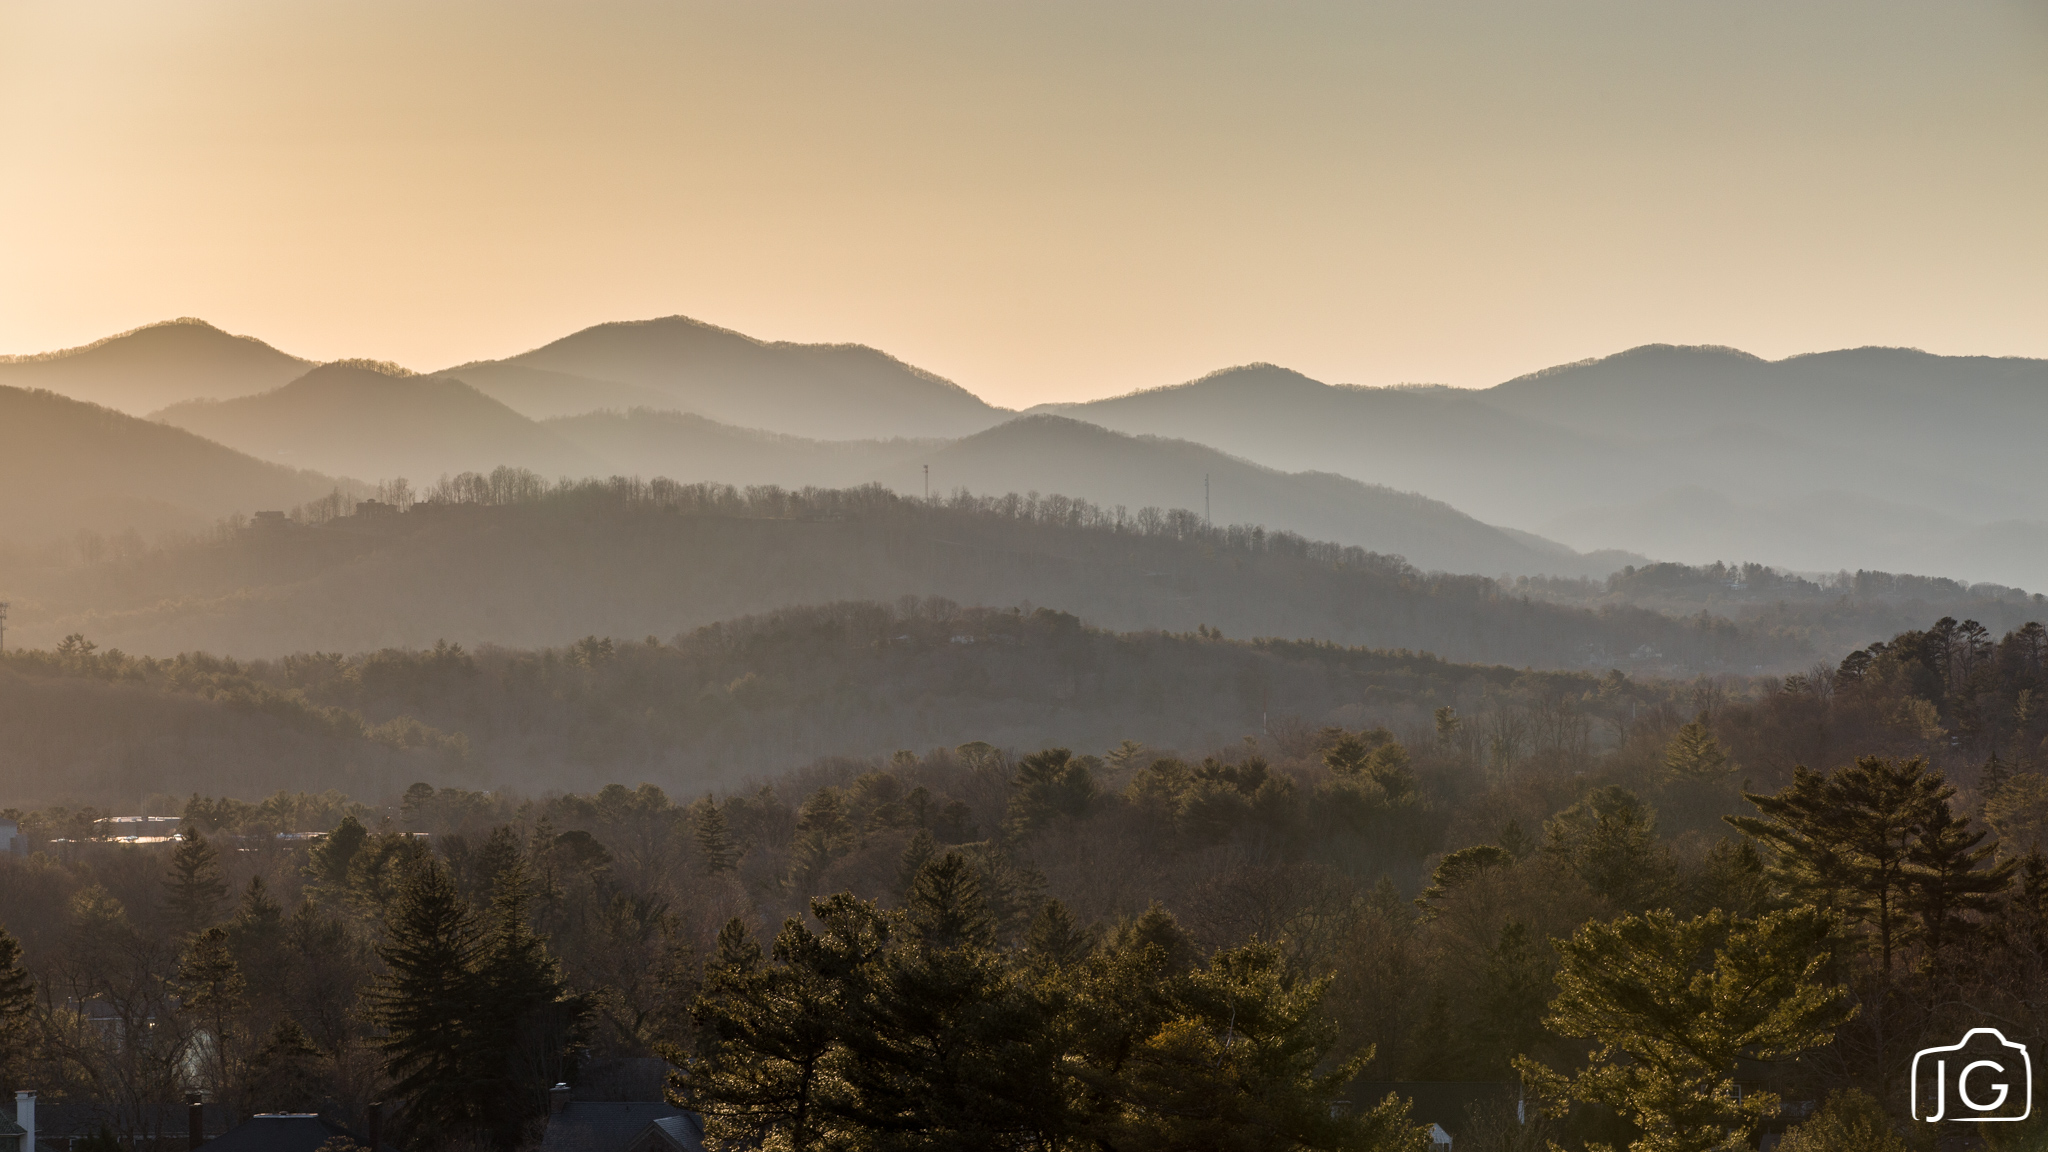 Sunset in the Blue Ridge Mountains of NC